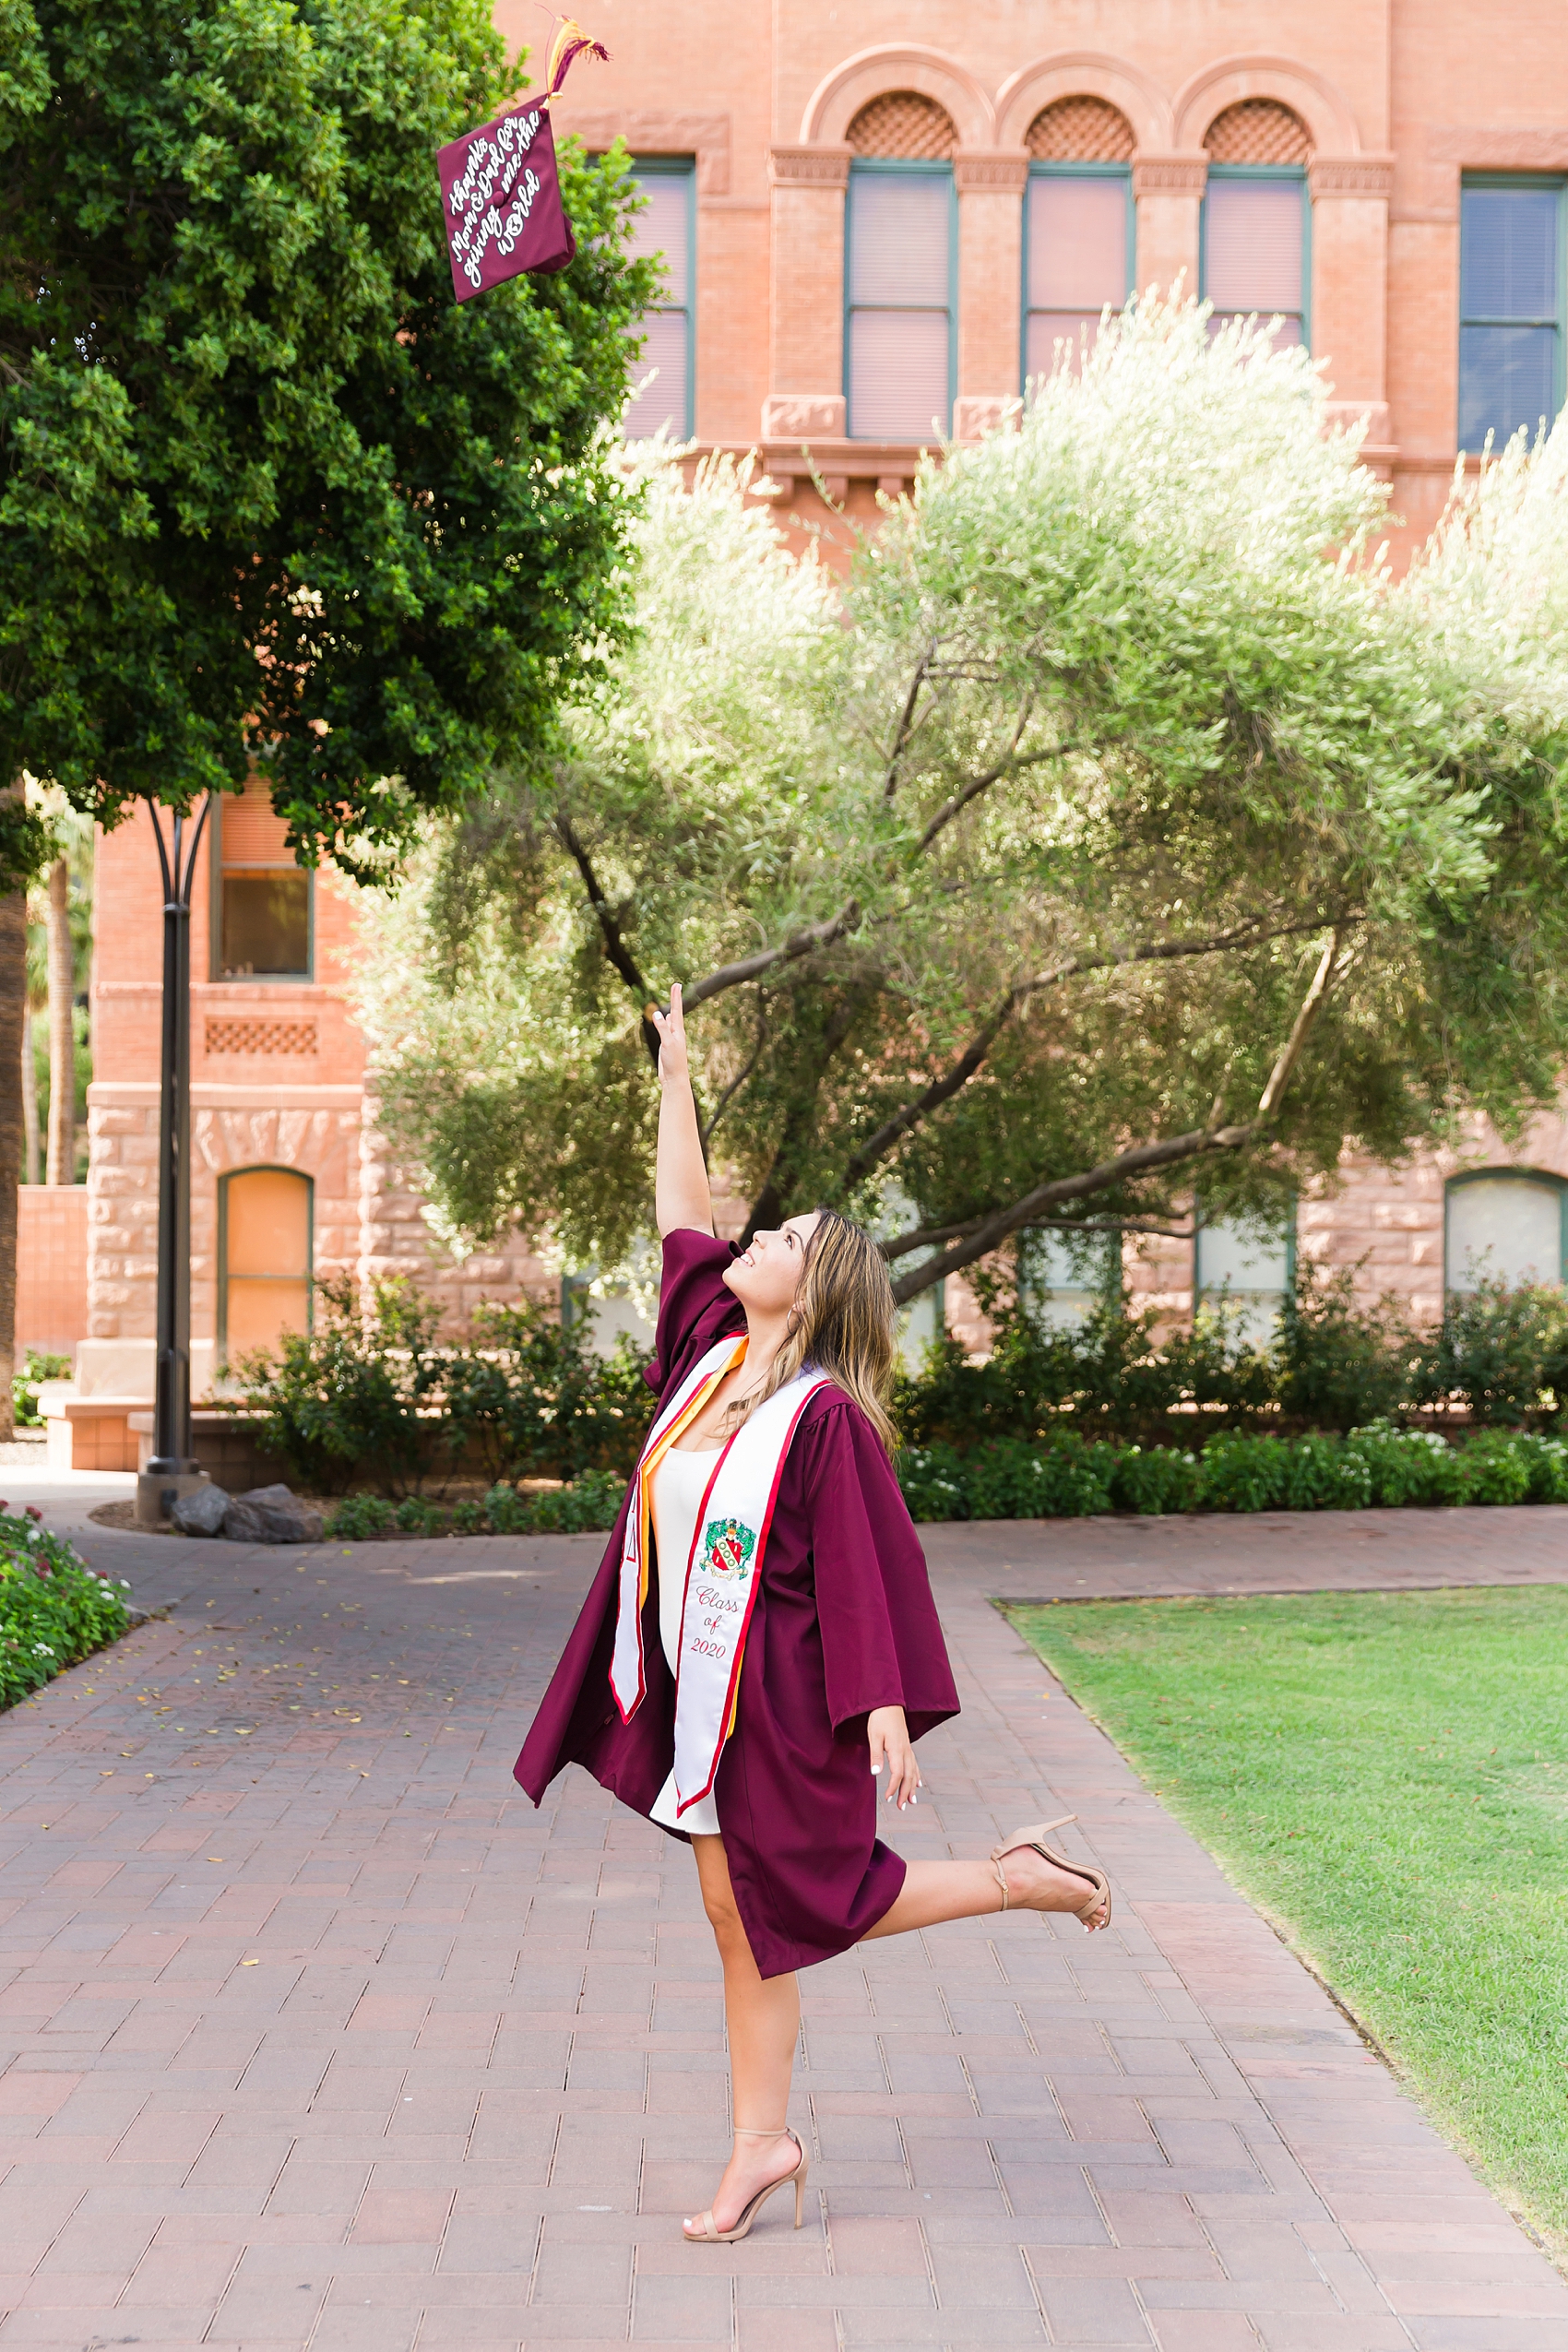 Leah Hope Photography | Phoenix Scottsdale Tempe Arizona | ASU Arizona State University | College Senior Pictures | Graduation Photos | Cap and Gown | Old Main and Palm Lane | Papago Park Desert Scenery | What to Wear Seniors | How to Pose | Senior Photographer